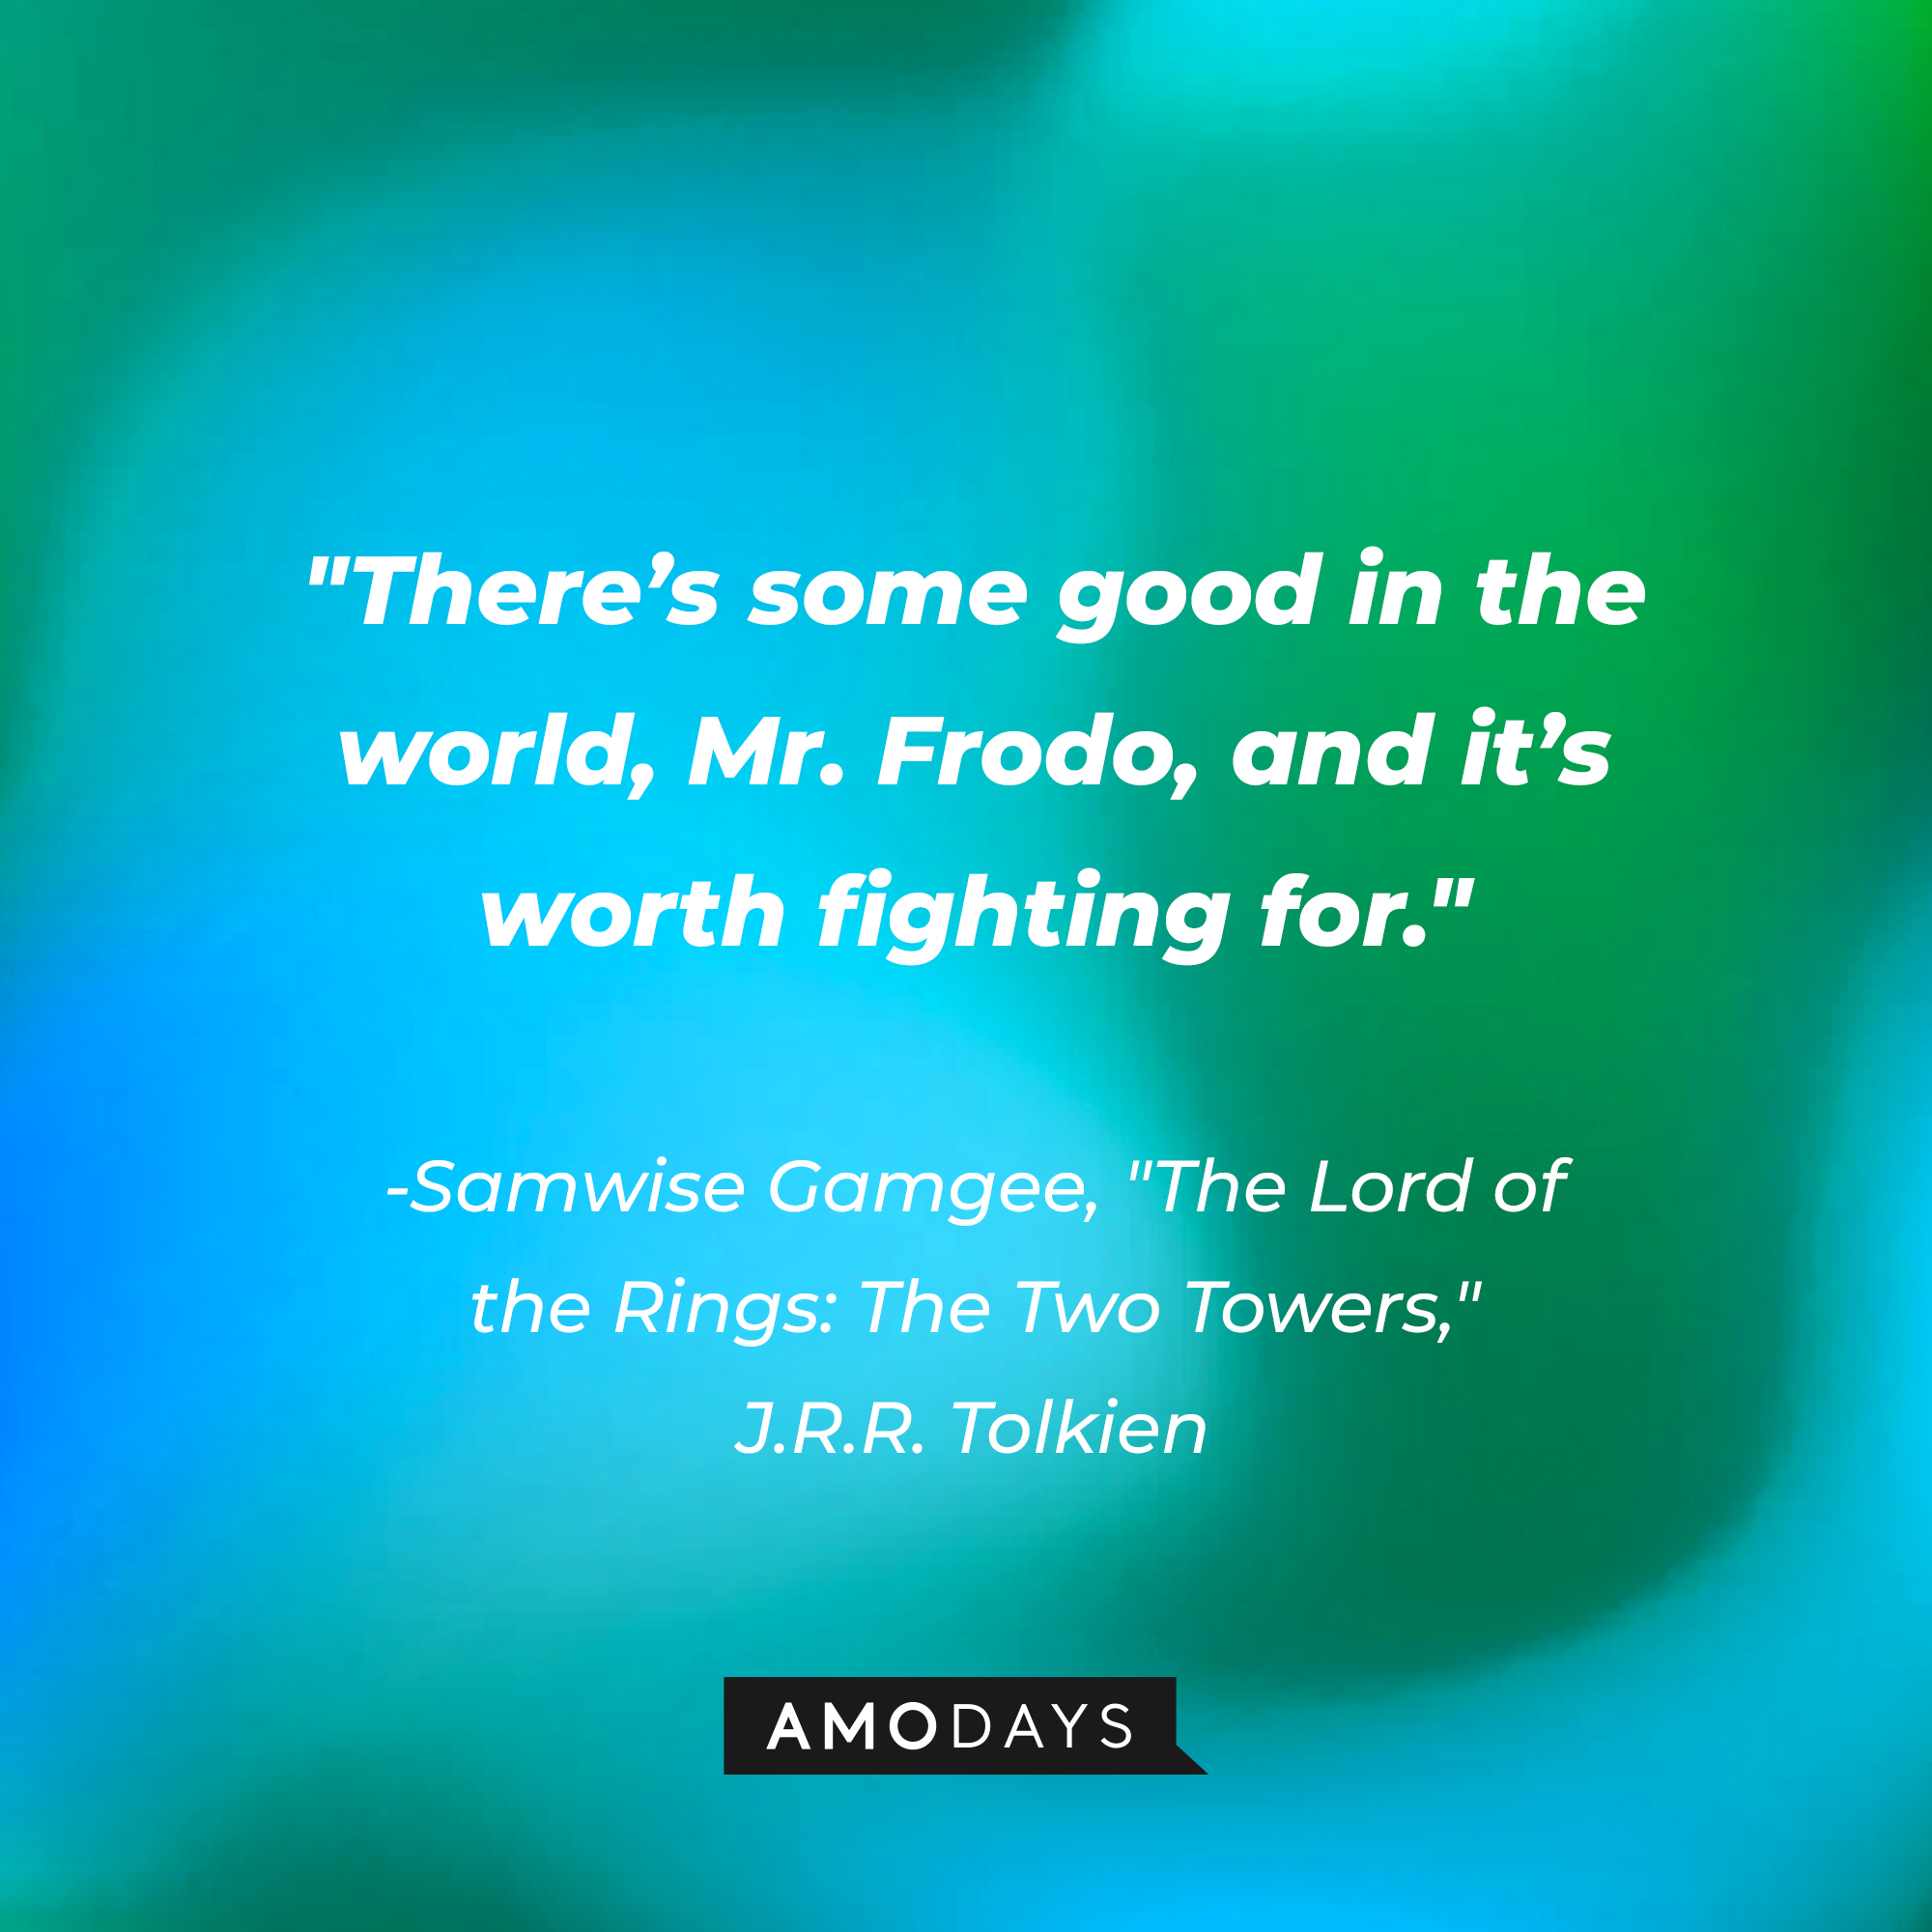 Samwise Gamgee’s quote from “The Lord of the Rings: The Two Towers” by J.R.R Tolkien: “Even the smallest person can change the course of the future.” | Source: AmoDays